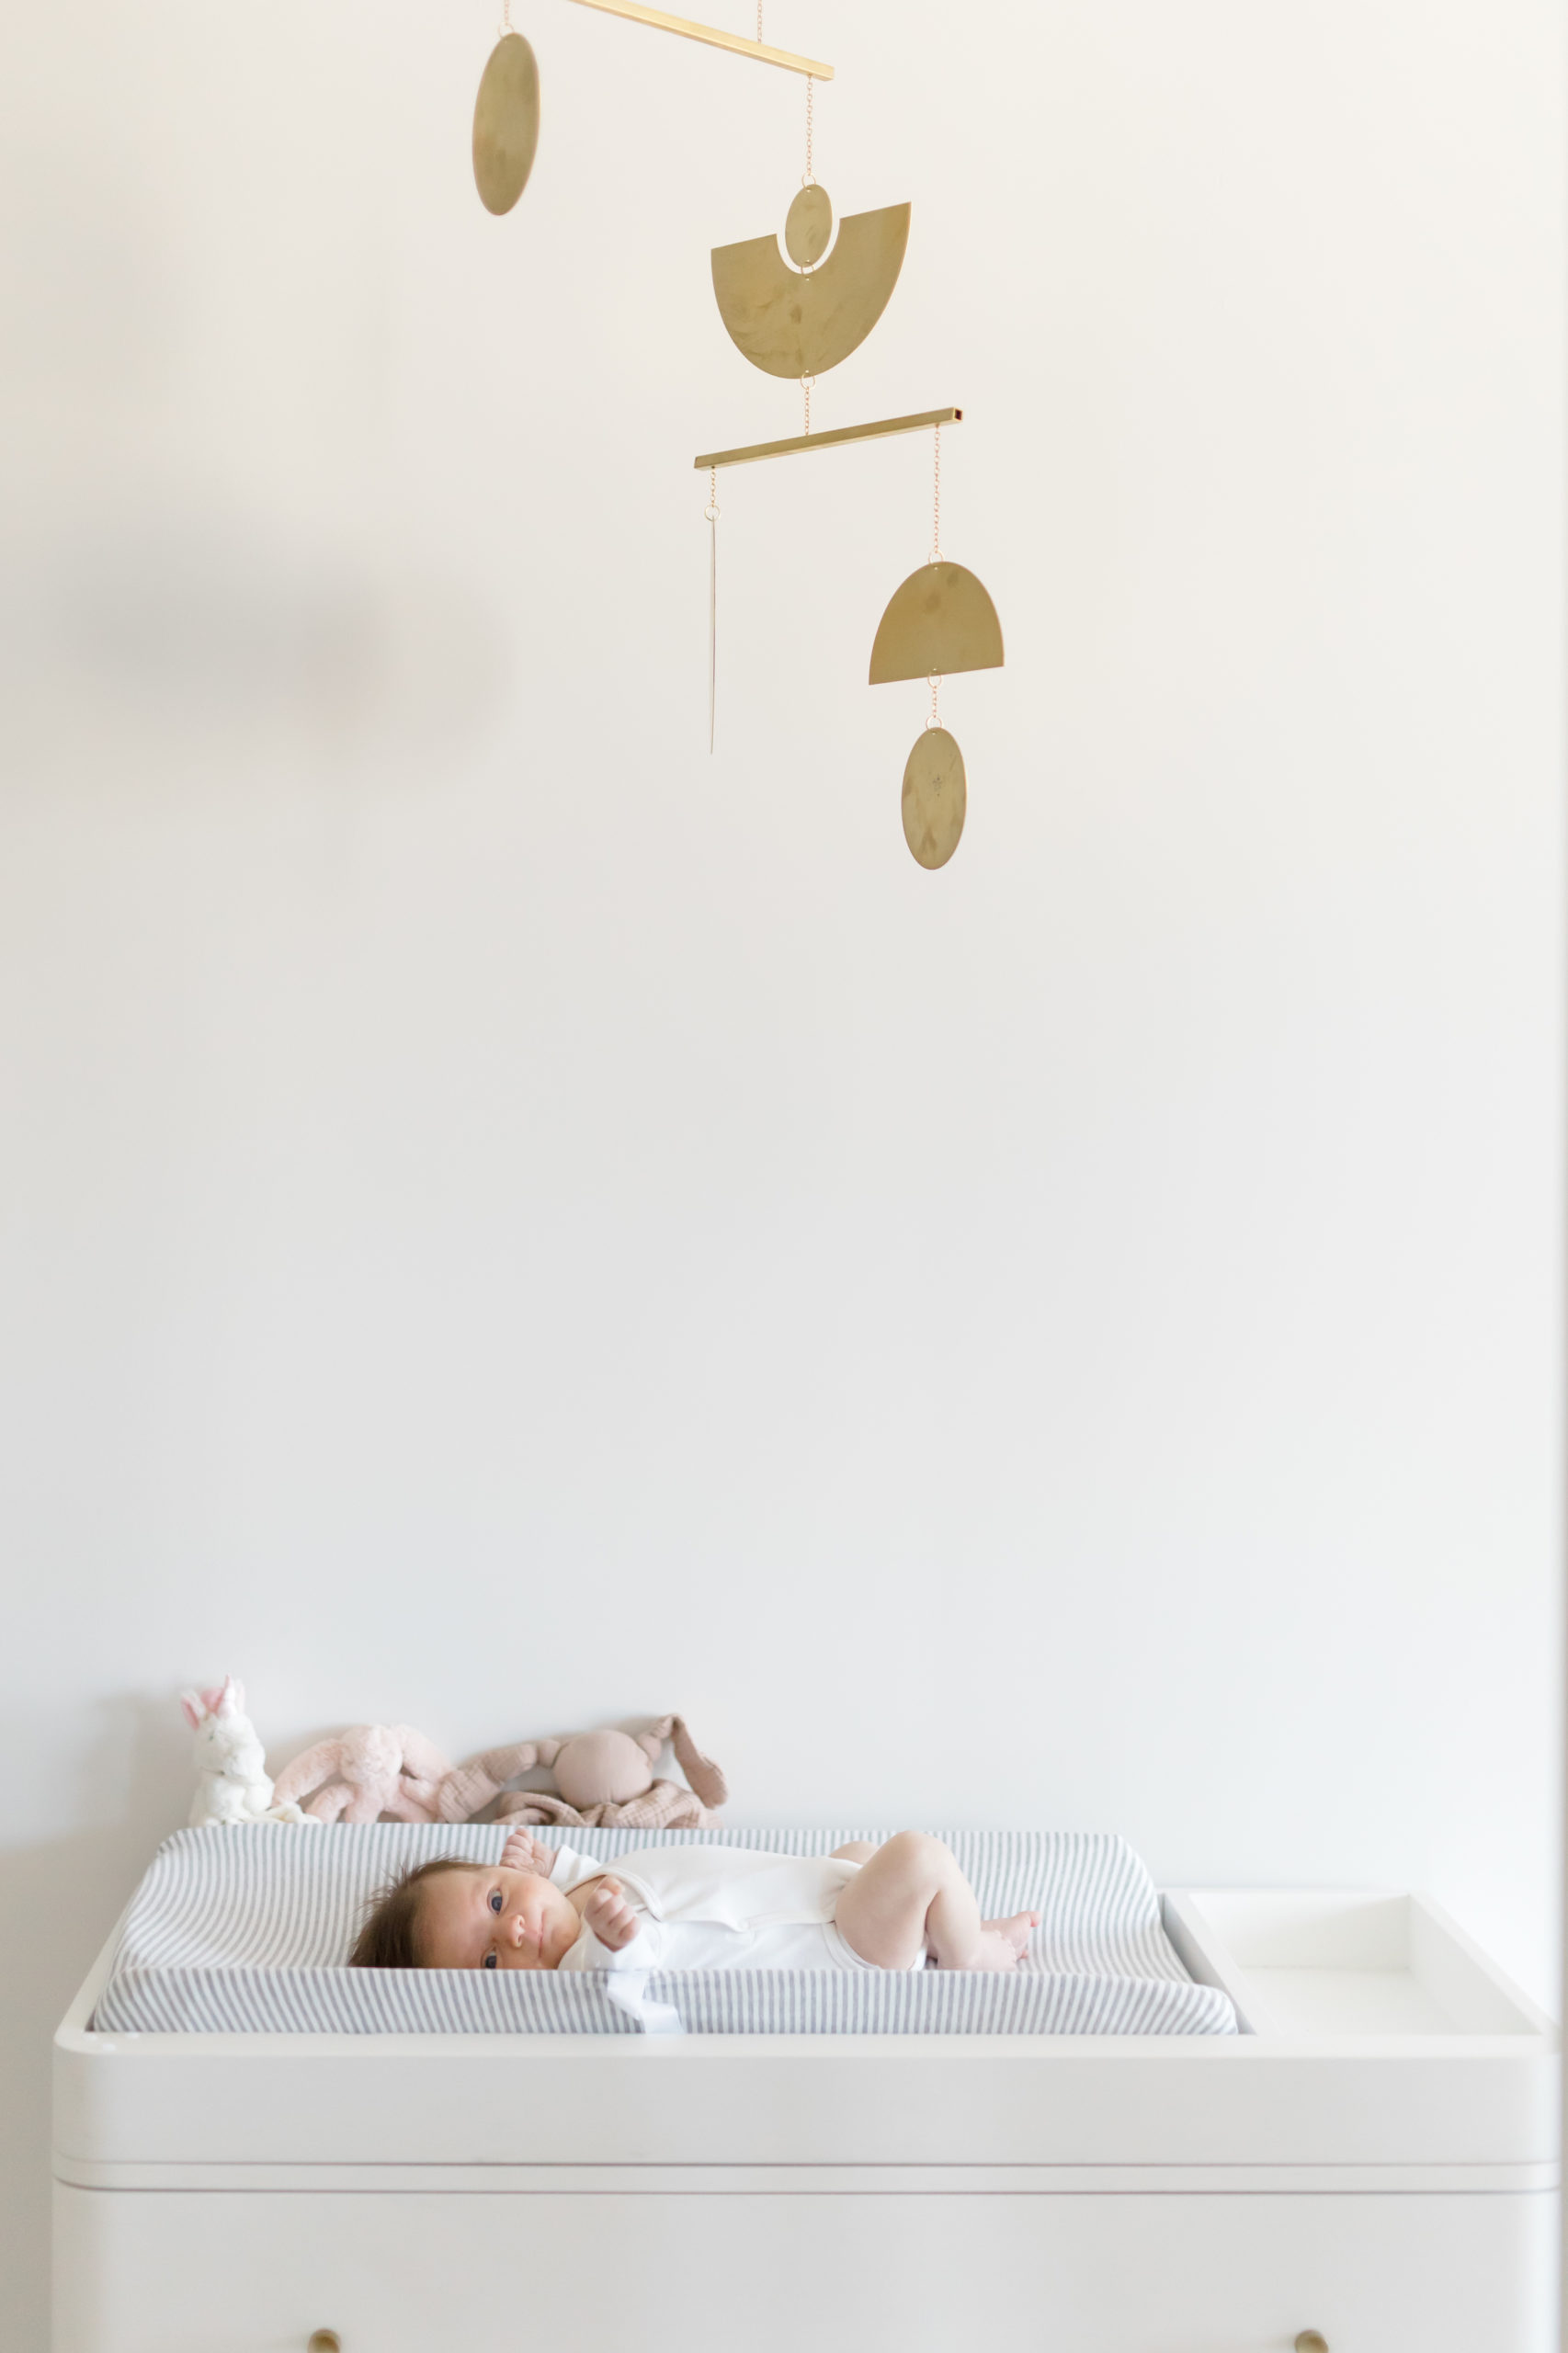 A baby on her changing table at an in home newborn photography session in NYC shot by Jacqueline Clair Photography